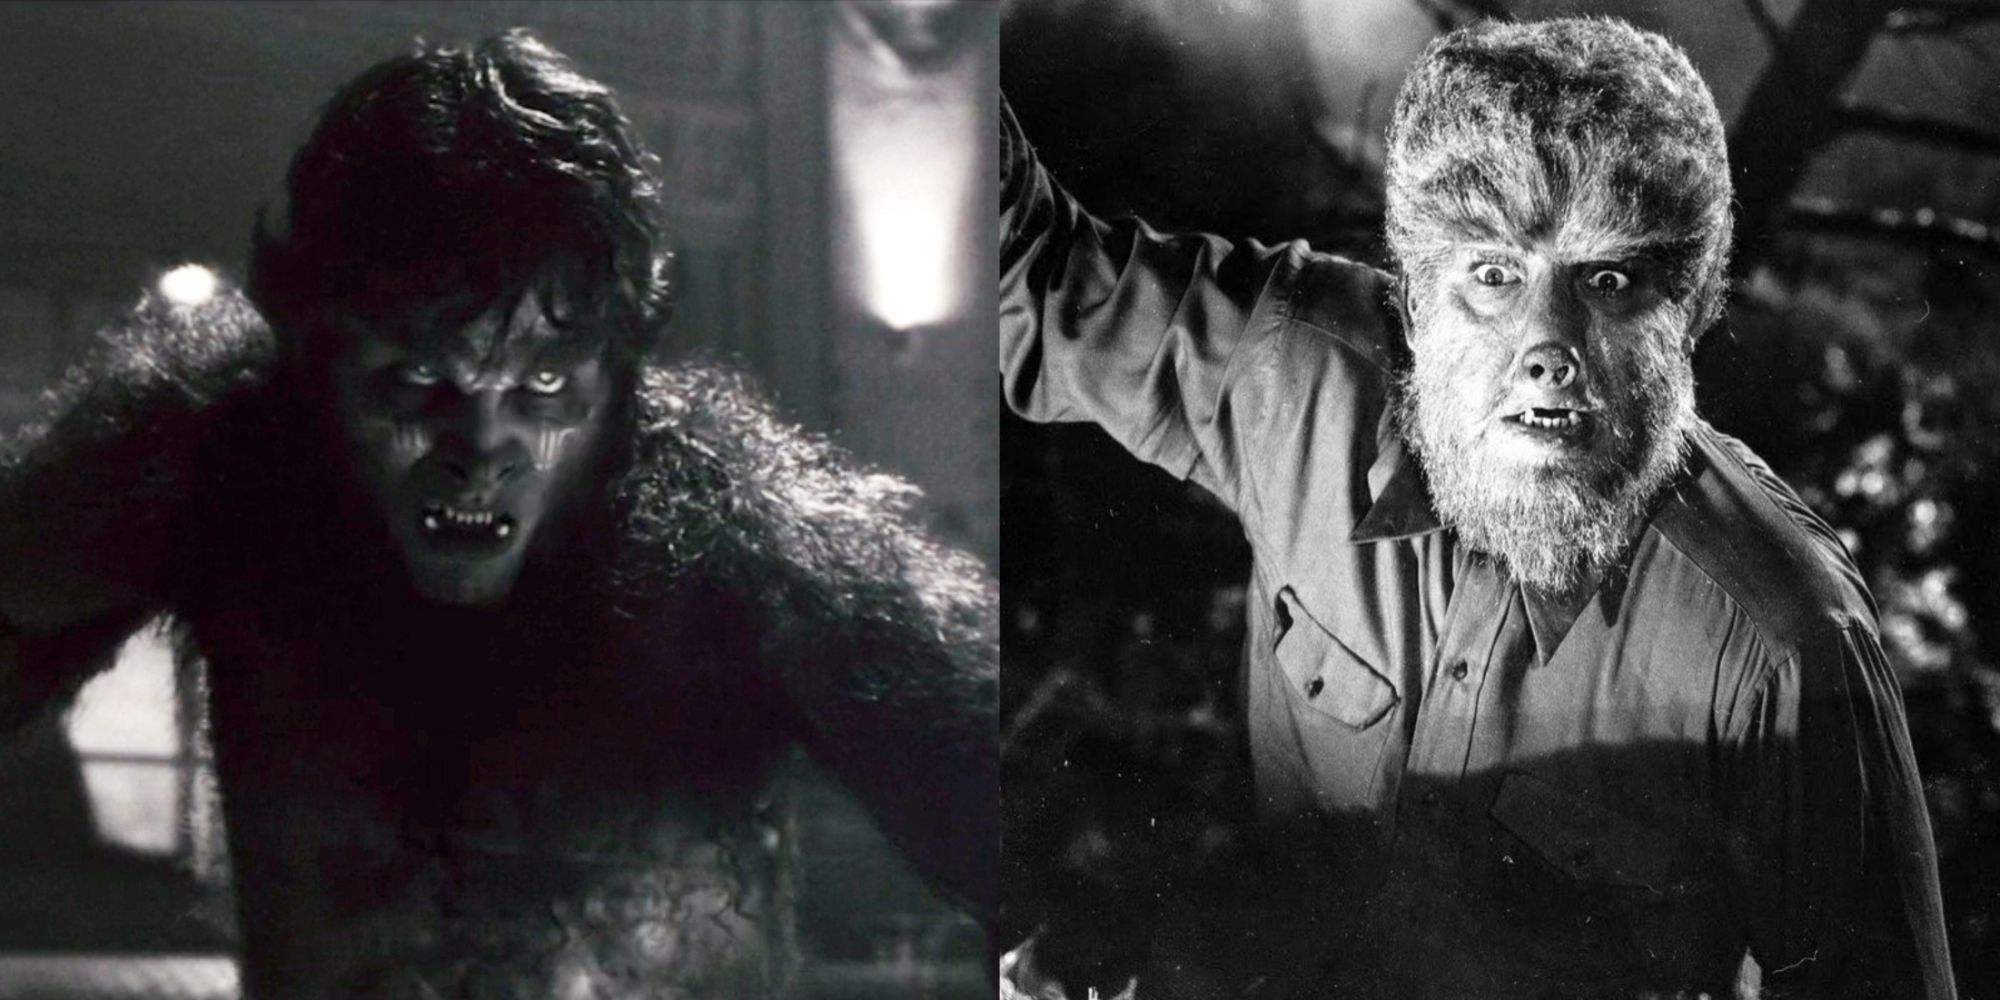 Split image of Werewolf in Werewolf By Night and Lawrence Talbot in werewolf form in The Wolf Man